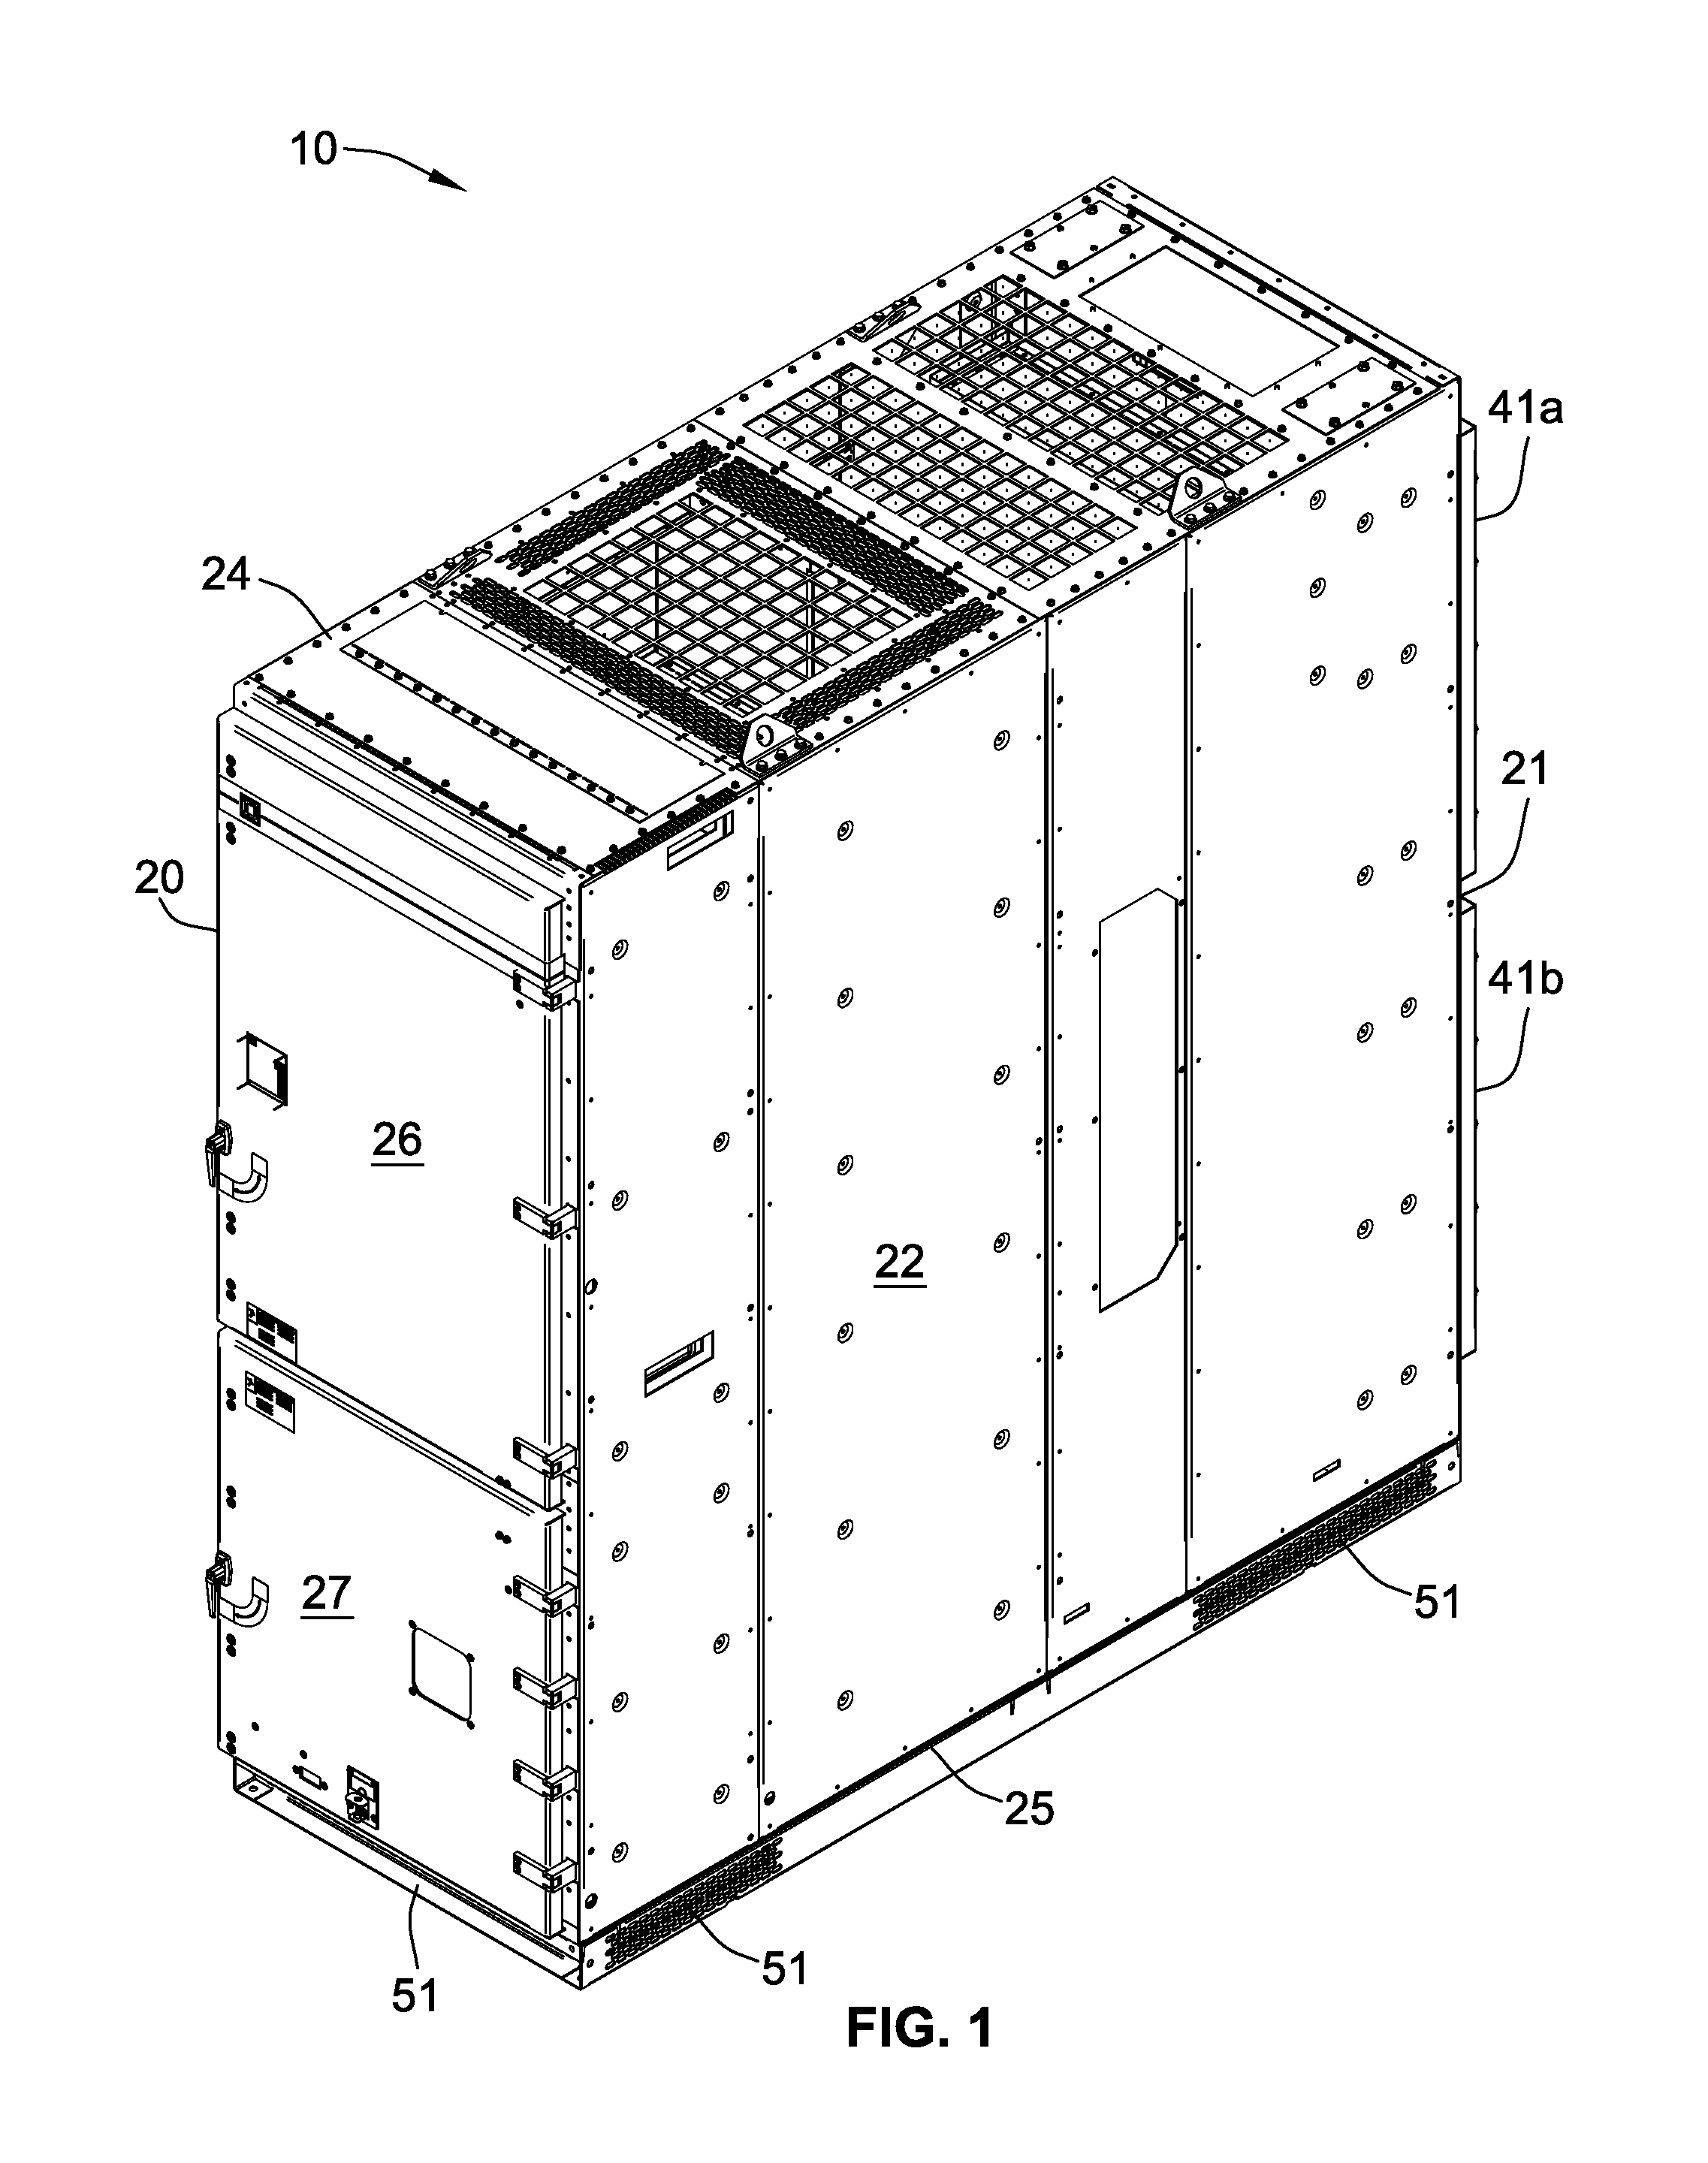 Arc-resistant switchgear enclosure with ambient air ventilation system